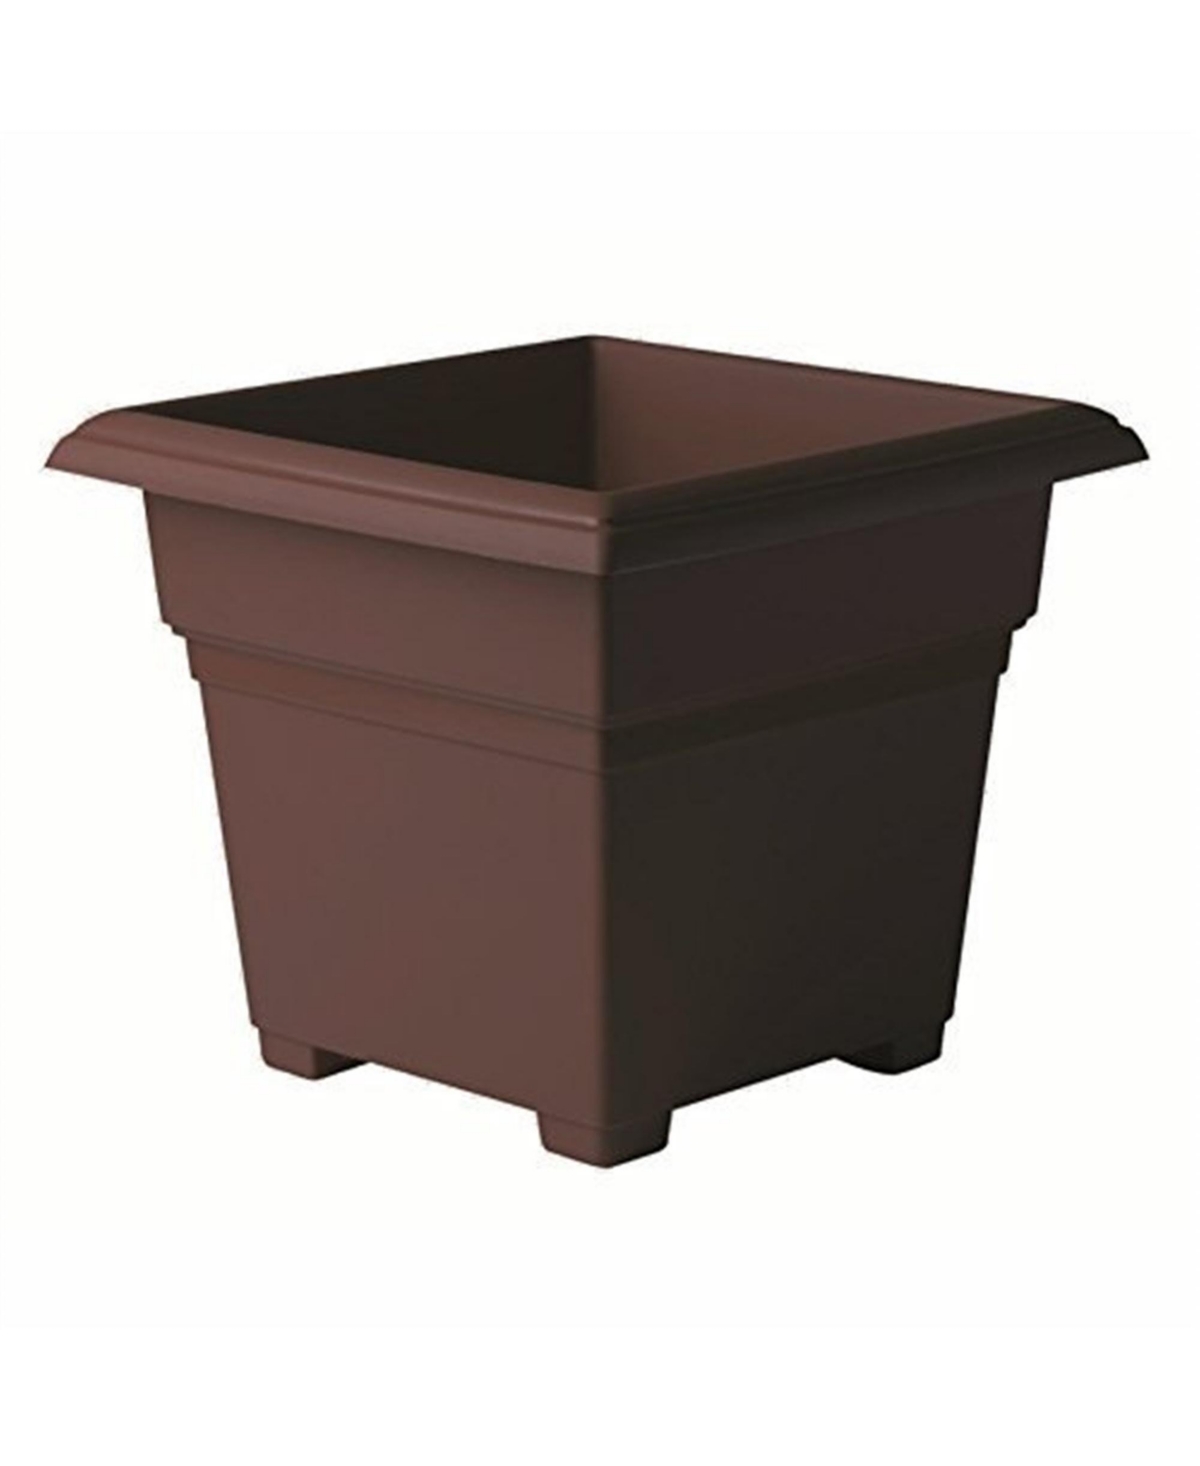 Countryside Square Tub Planter Brown 14 Inch - Brown